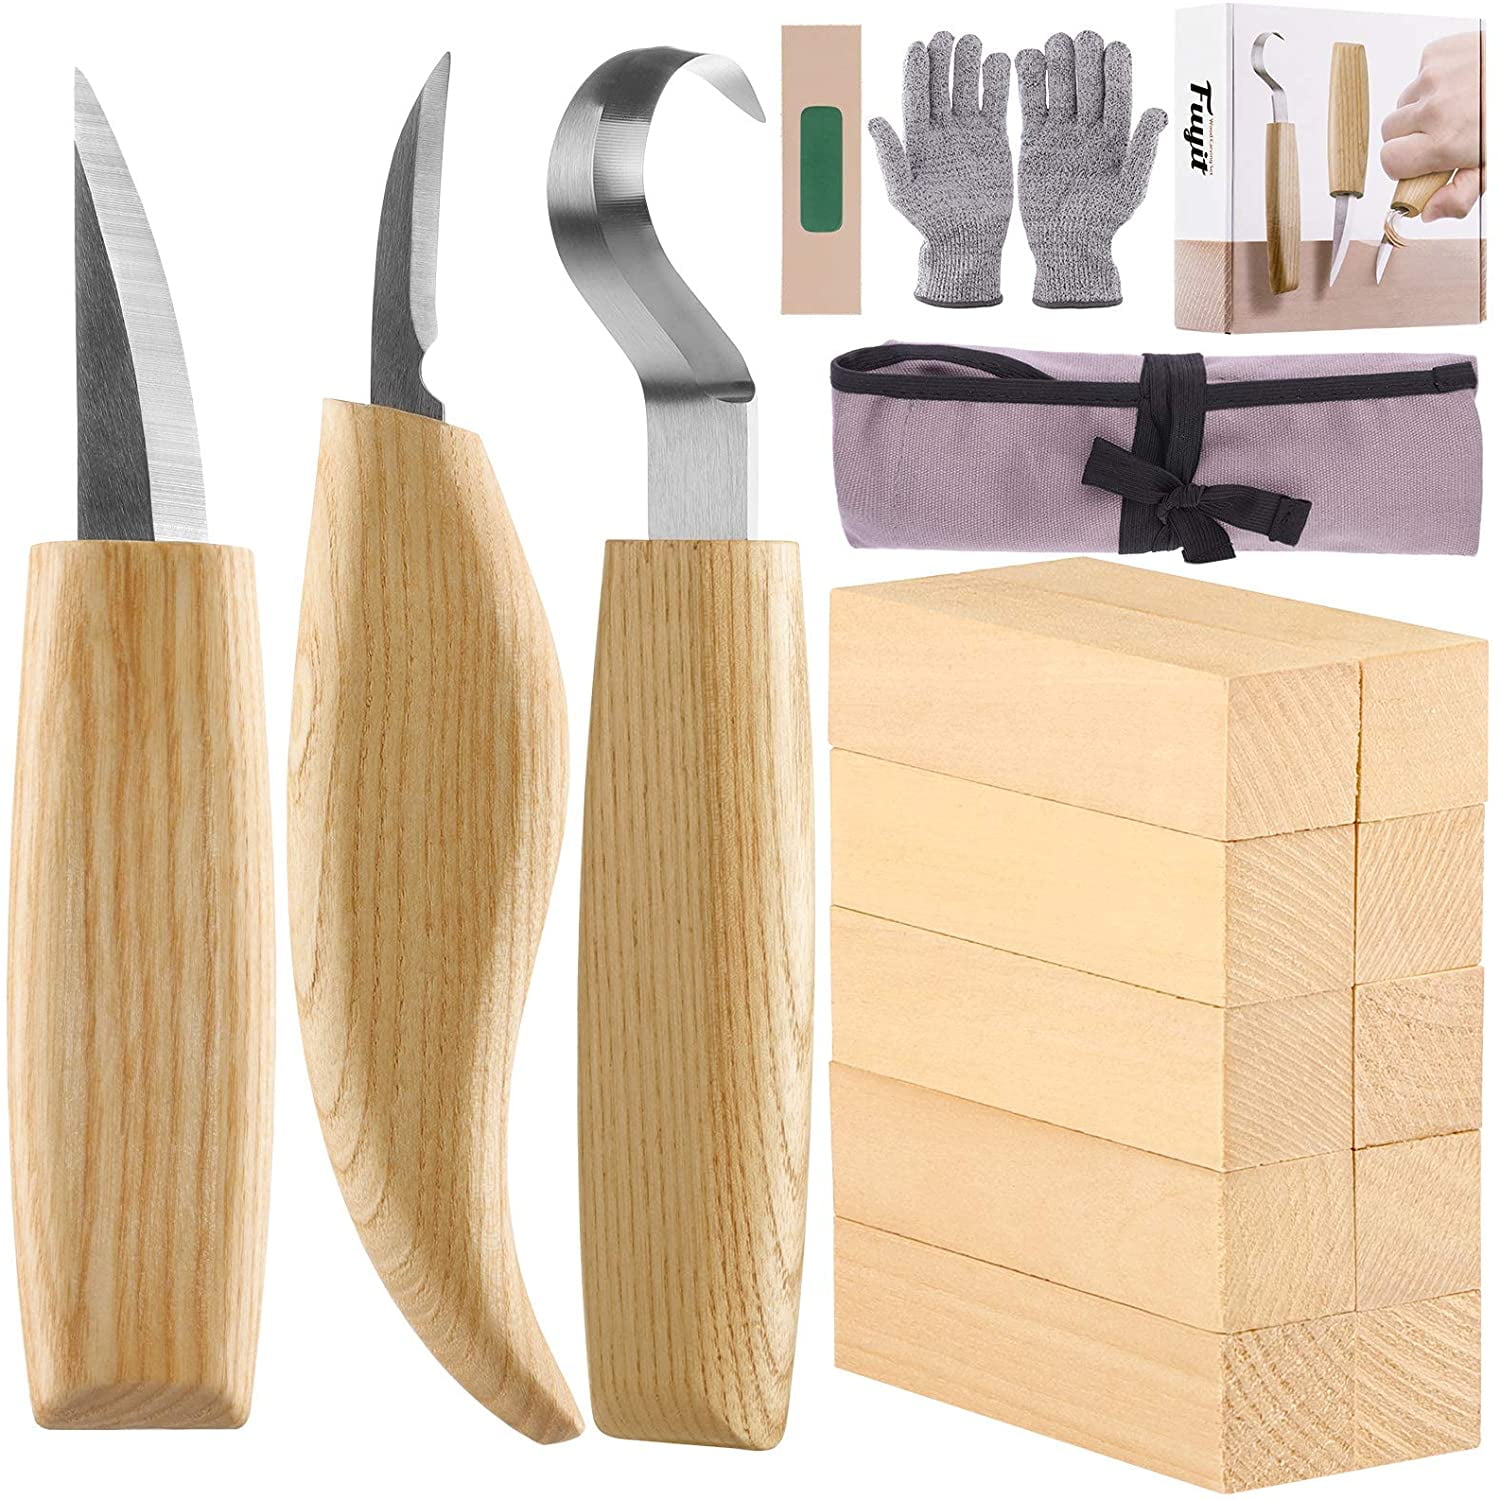 Fuyit Wood Whittling Kit with Basswood Wood Blocks Gifts Set for Adults and  Kids Beginners, Wood Carving Kit Set Includes 3pcs Wood Carving Knife 